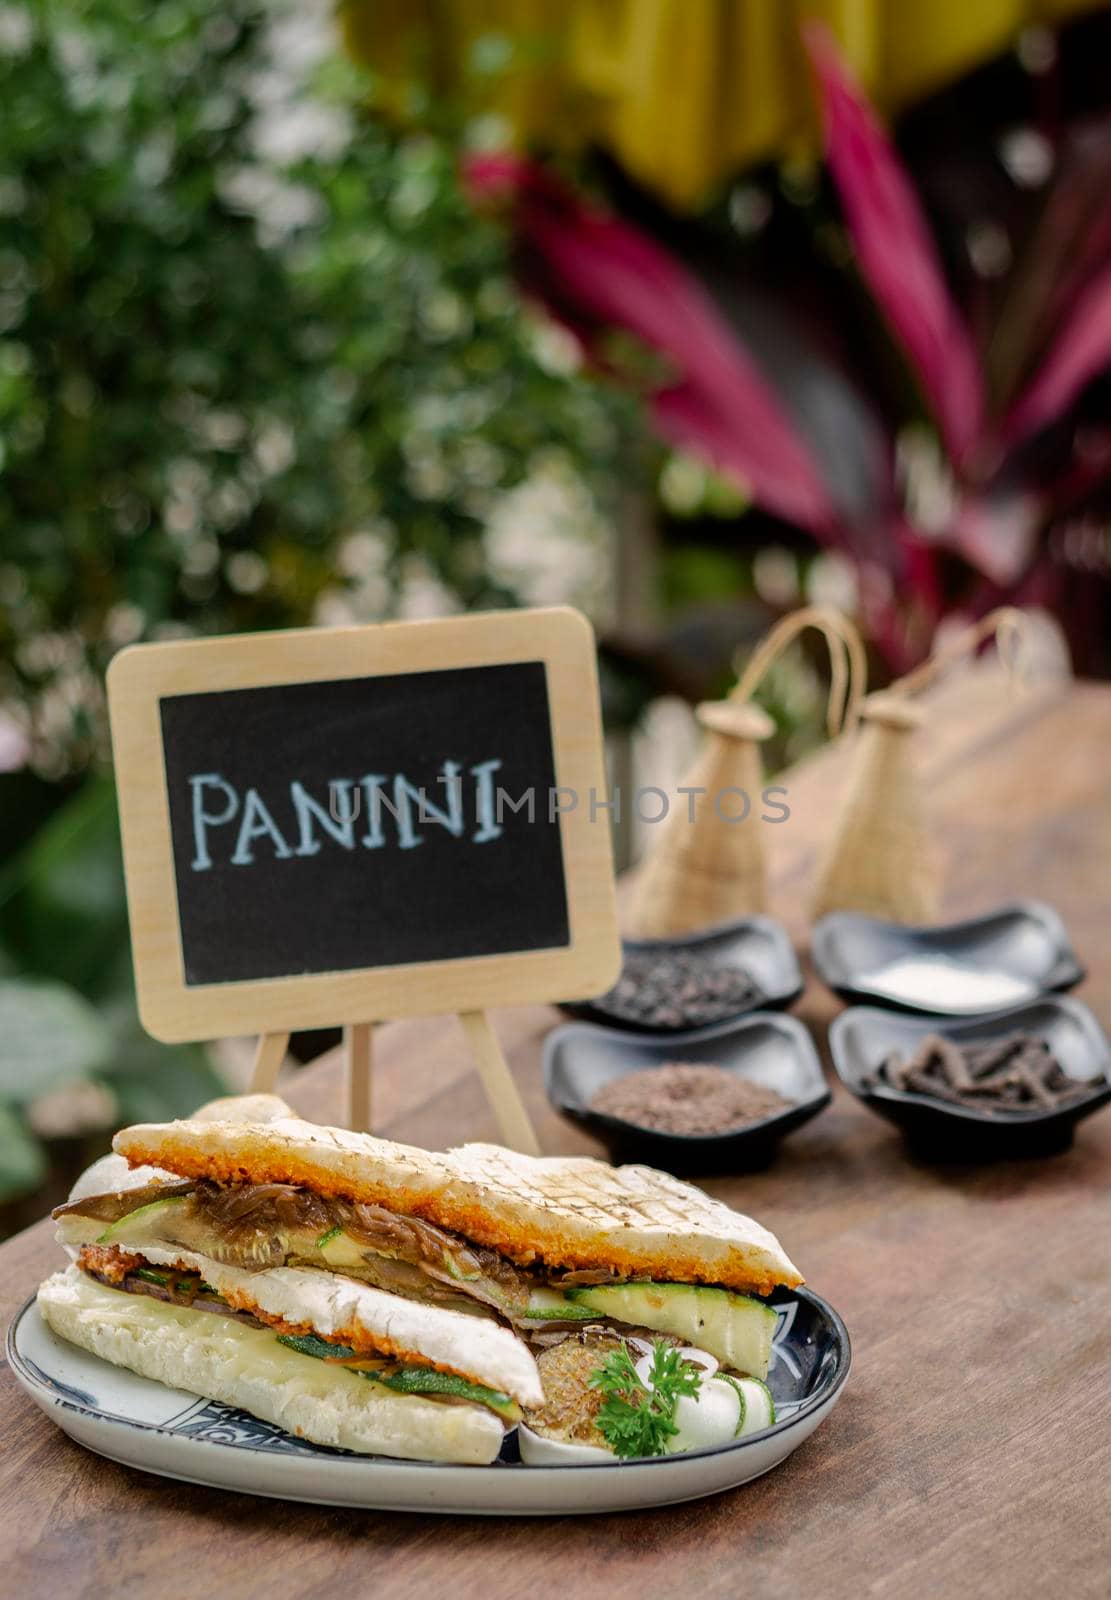 vegan roasted vegetable toasted panini sandwich in rustic garden table setting outdoors in sicily